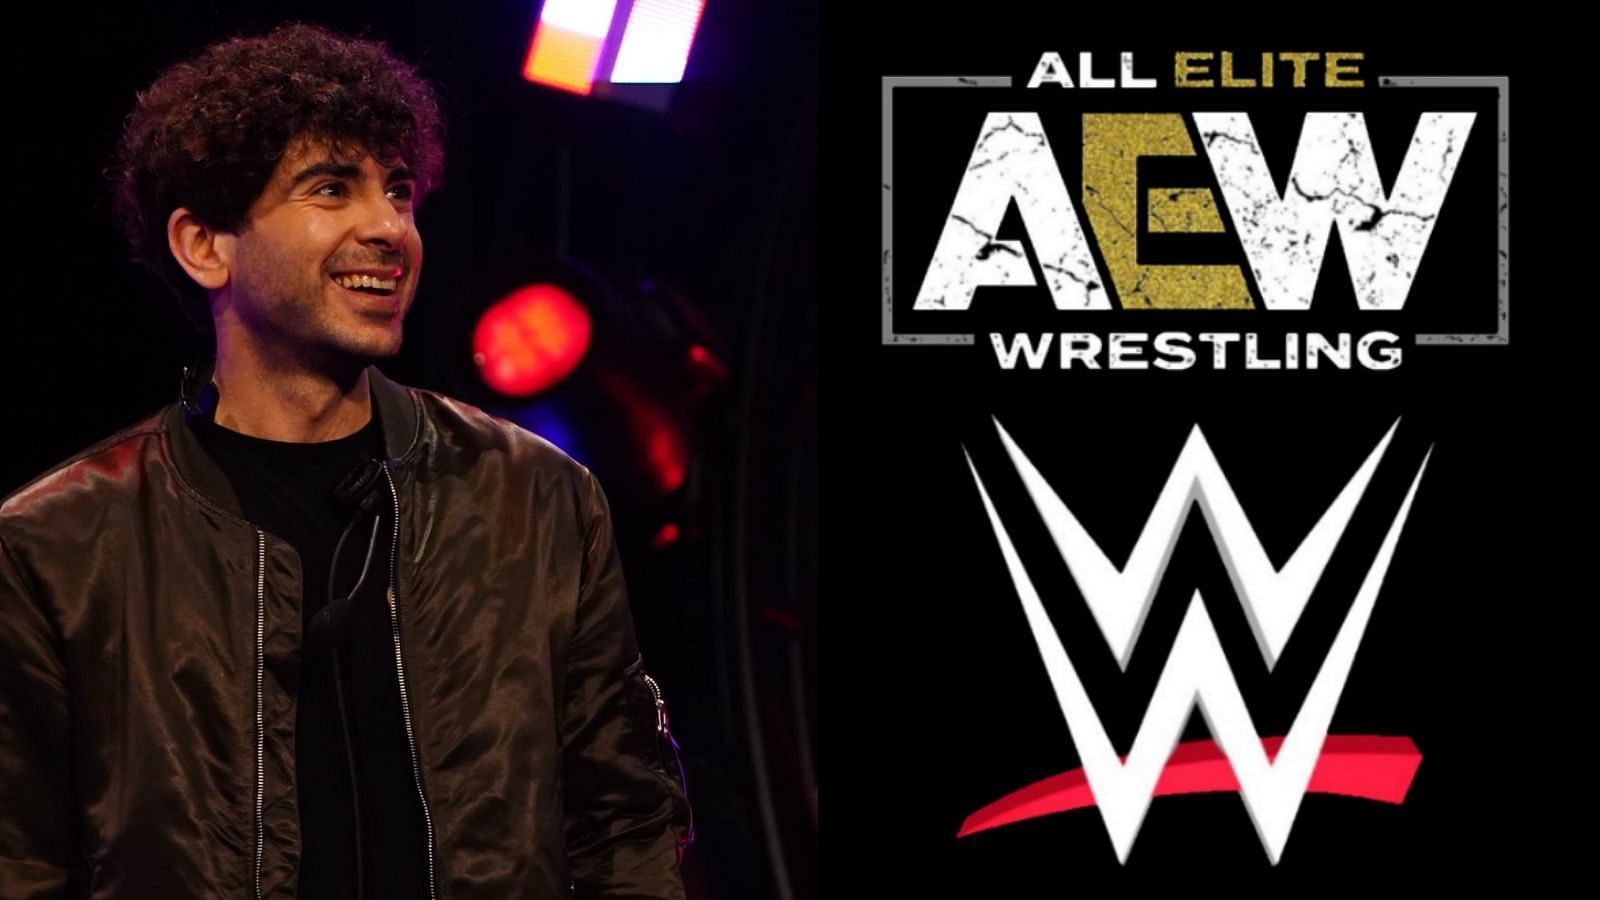 Quite a number of big names in AEW are currently injured.